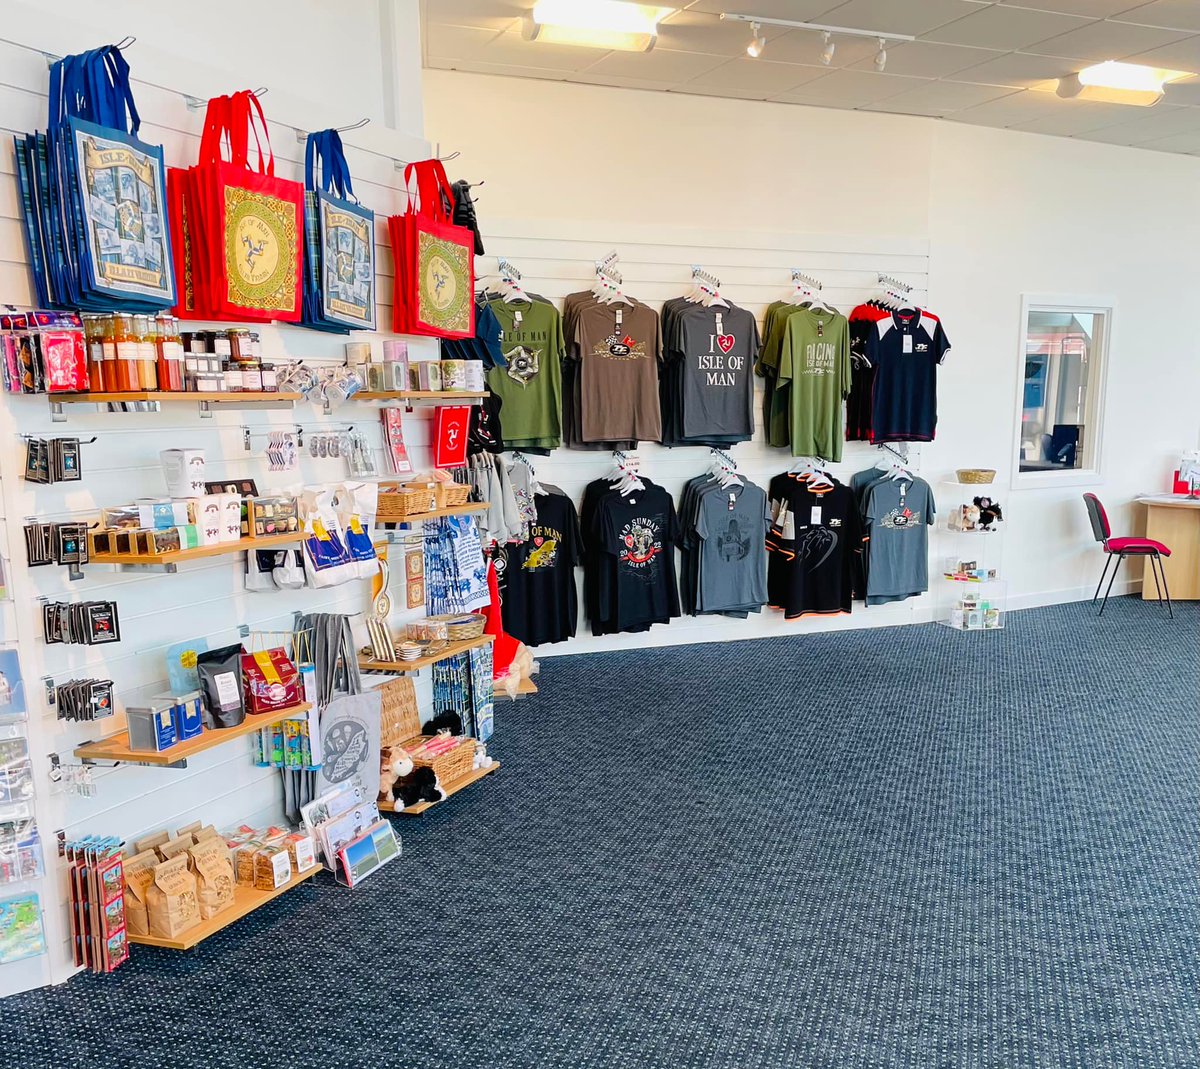 🎉🎉 Our refurbishment works are finished and our shiny new shop is open just in time for TT 🏍🏍🇮🇲🇮🇲
#visitisleofman #isleofman #isleofmantt #touristinformation #manx #manxproduce #isleofmantransport #busvannin #heritagerailway #ttraces